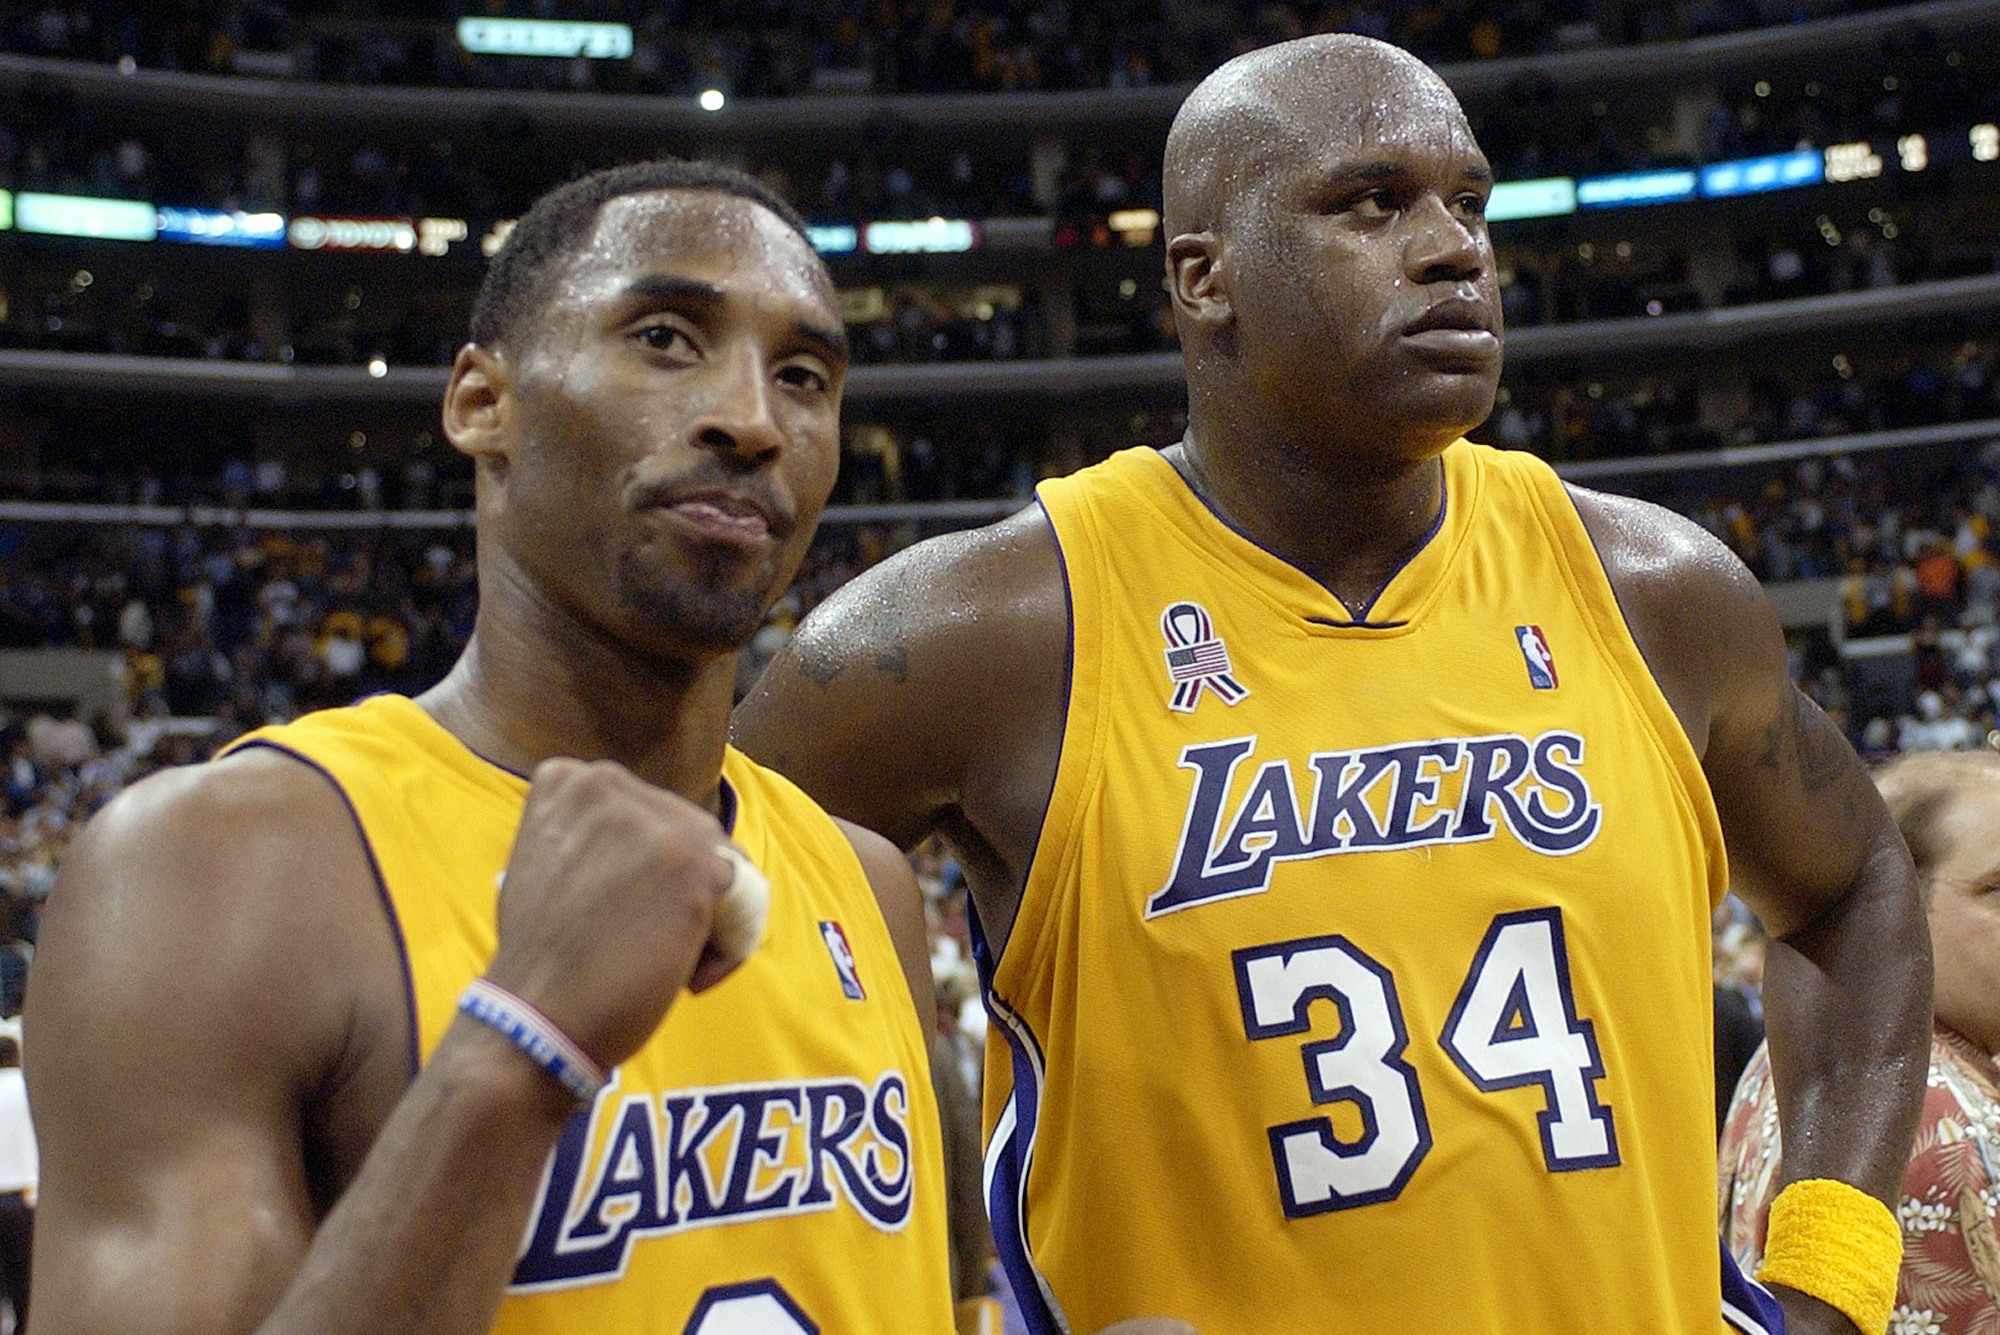 Lakers News: DeShawn Stevenson says he was more scared of Kobe